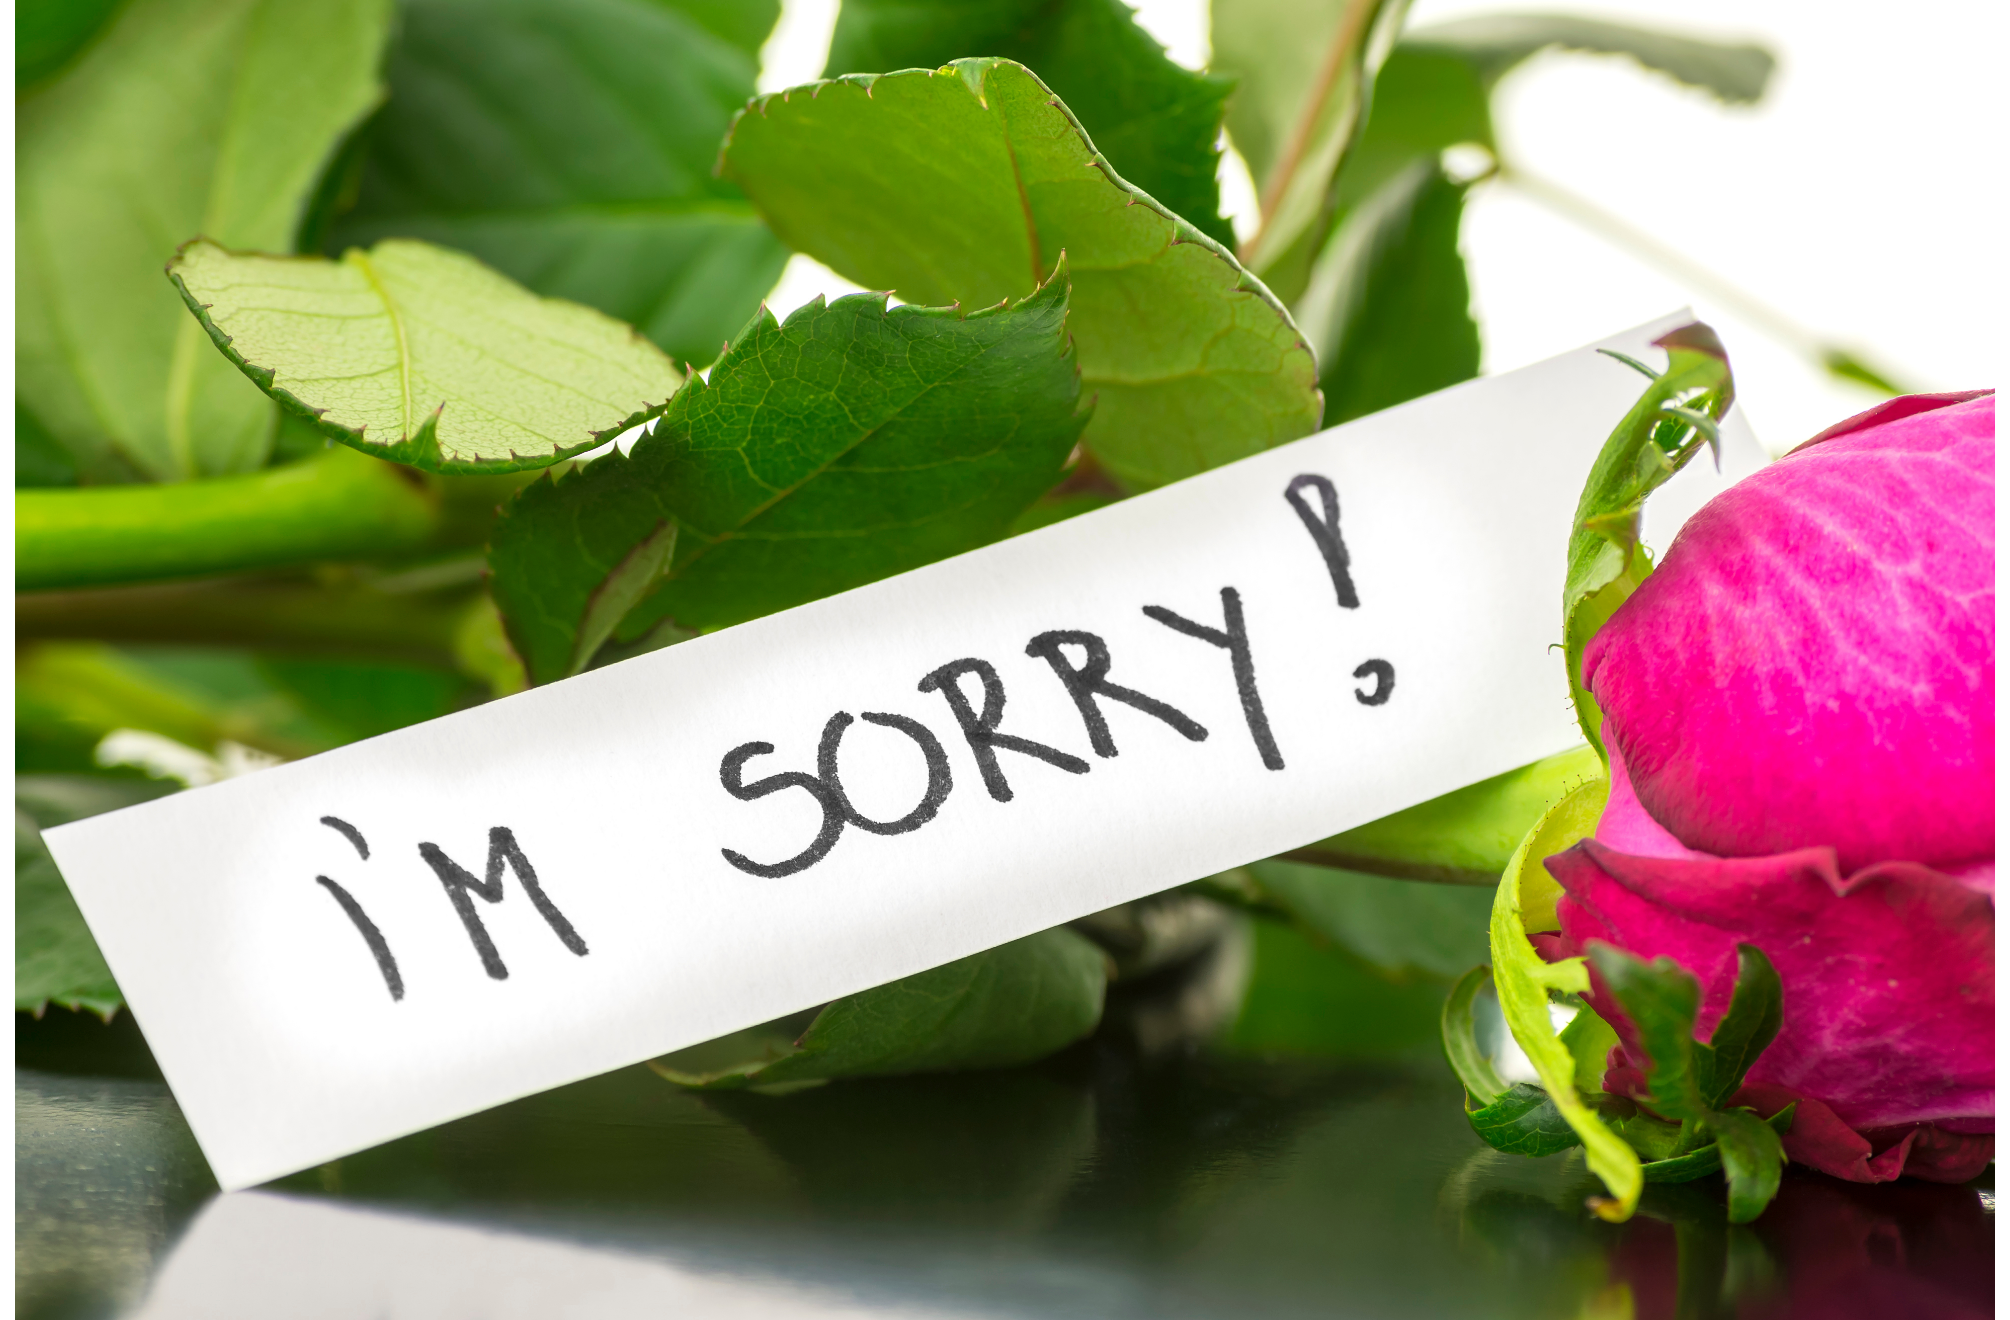 Apology flowers